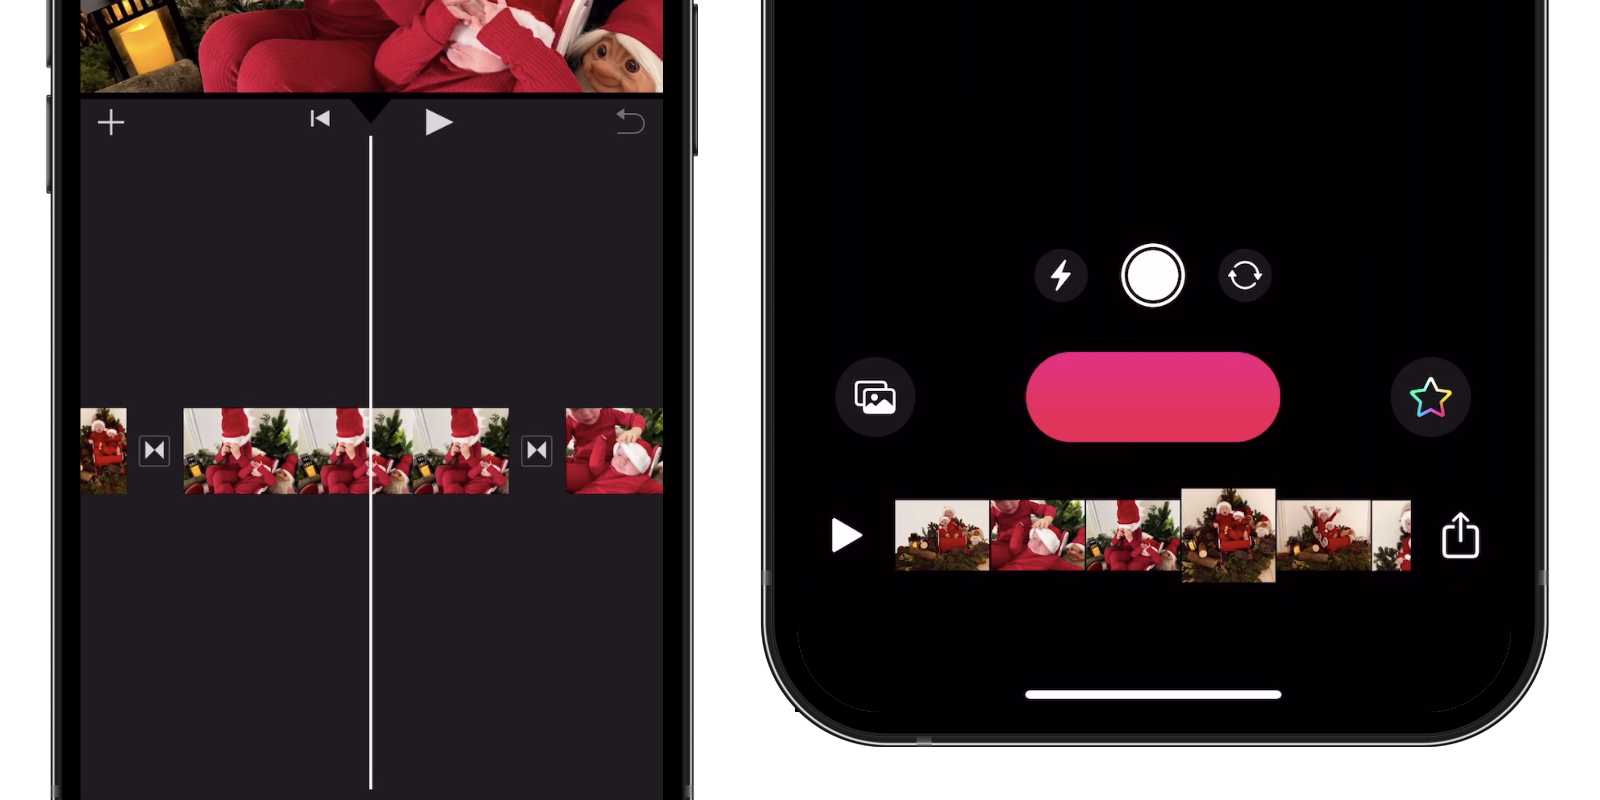 iMovie Clips iPhone hjemmevideo